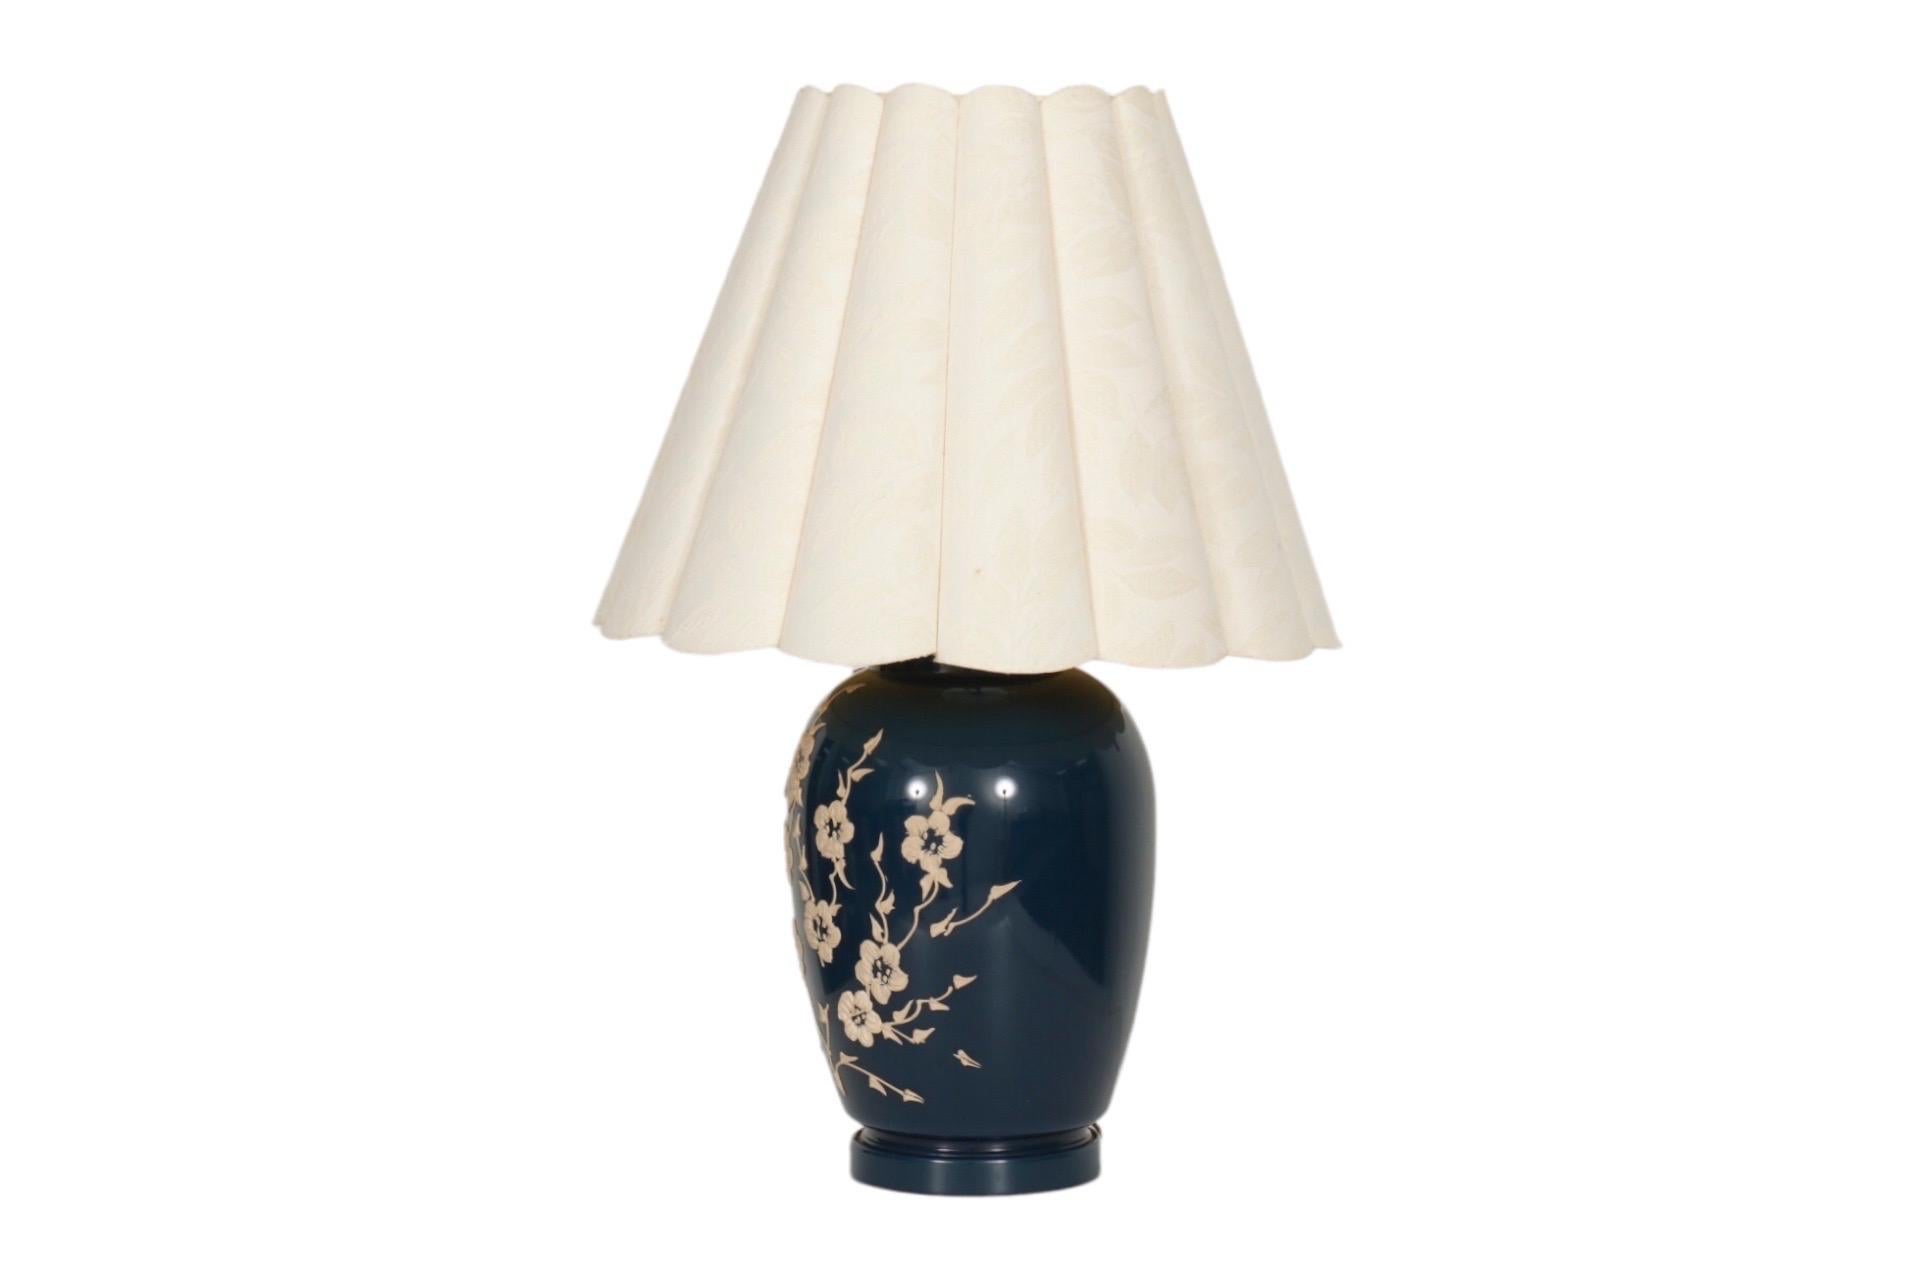 A navy blue ceramic table lamp. The ginger jar shaped vase is decorated with elegantly applied flowers in tan. Topped with a rounded flute lampshade in cream. Measures 19”H to the top of the socket, 26.75”H to the top of the finial. Shade measures